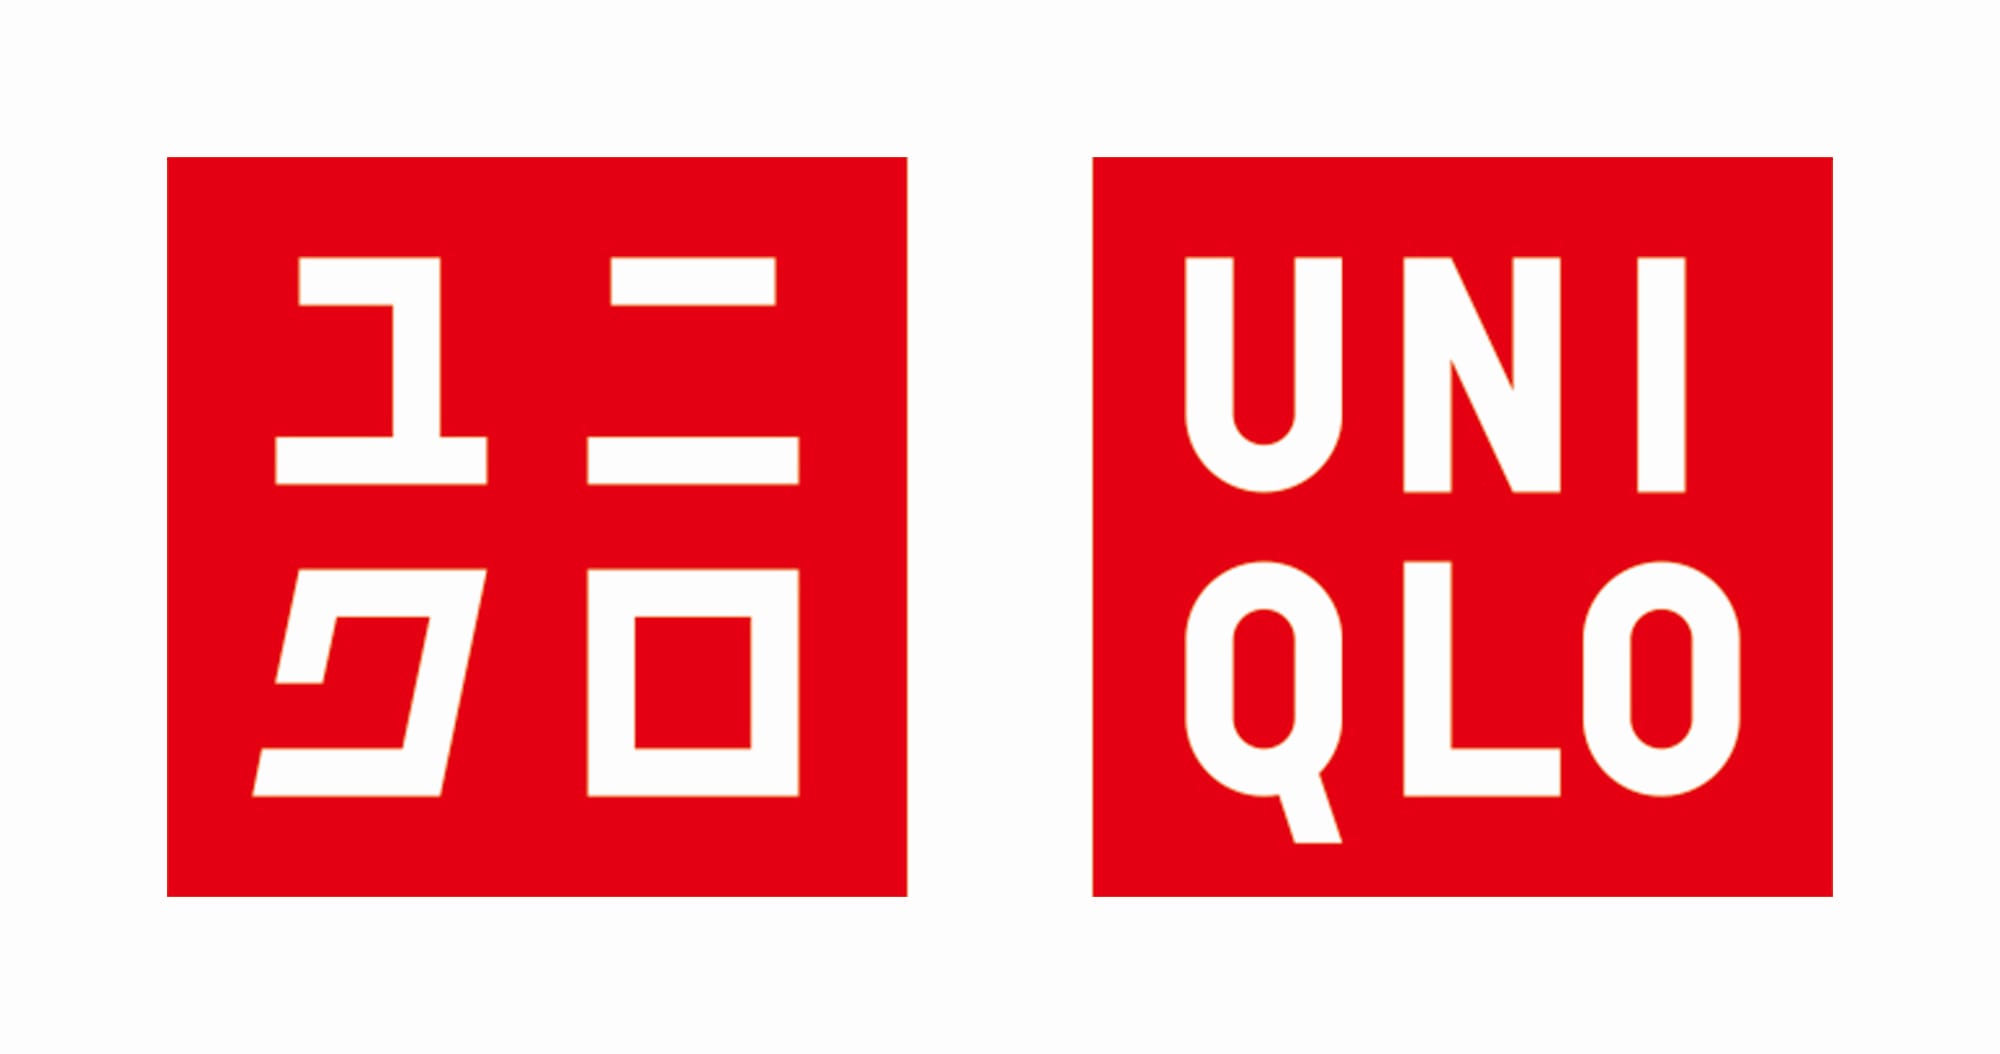 In 2006, fashion brand, Uniqlo started its expansion to overseas from its flagship store at New York. Sato took charge of the global branding communication activities which is connected to the management of the company. The activities included the designing of the logo-mark displayed in both Japanese Katakana and English alphabet, flagship store designs, product planning and promotion strategies through collaborations between creators from both Japan and overseas.